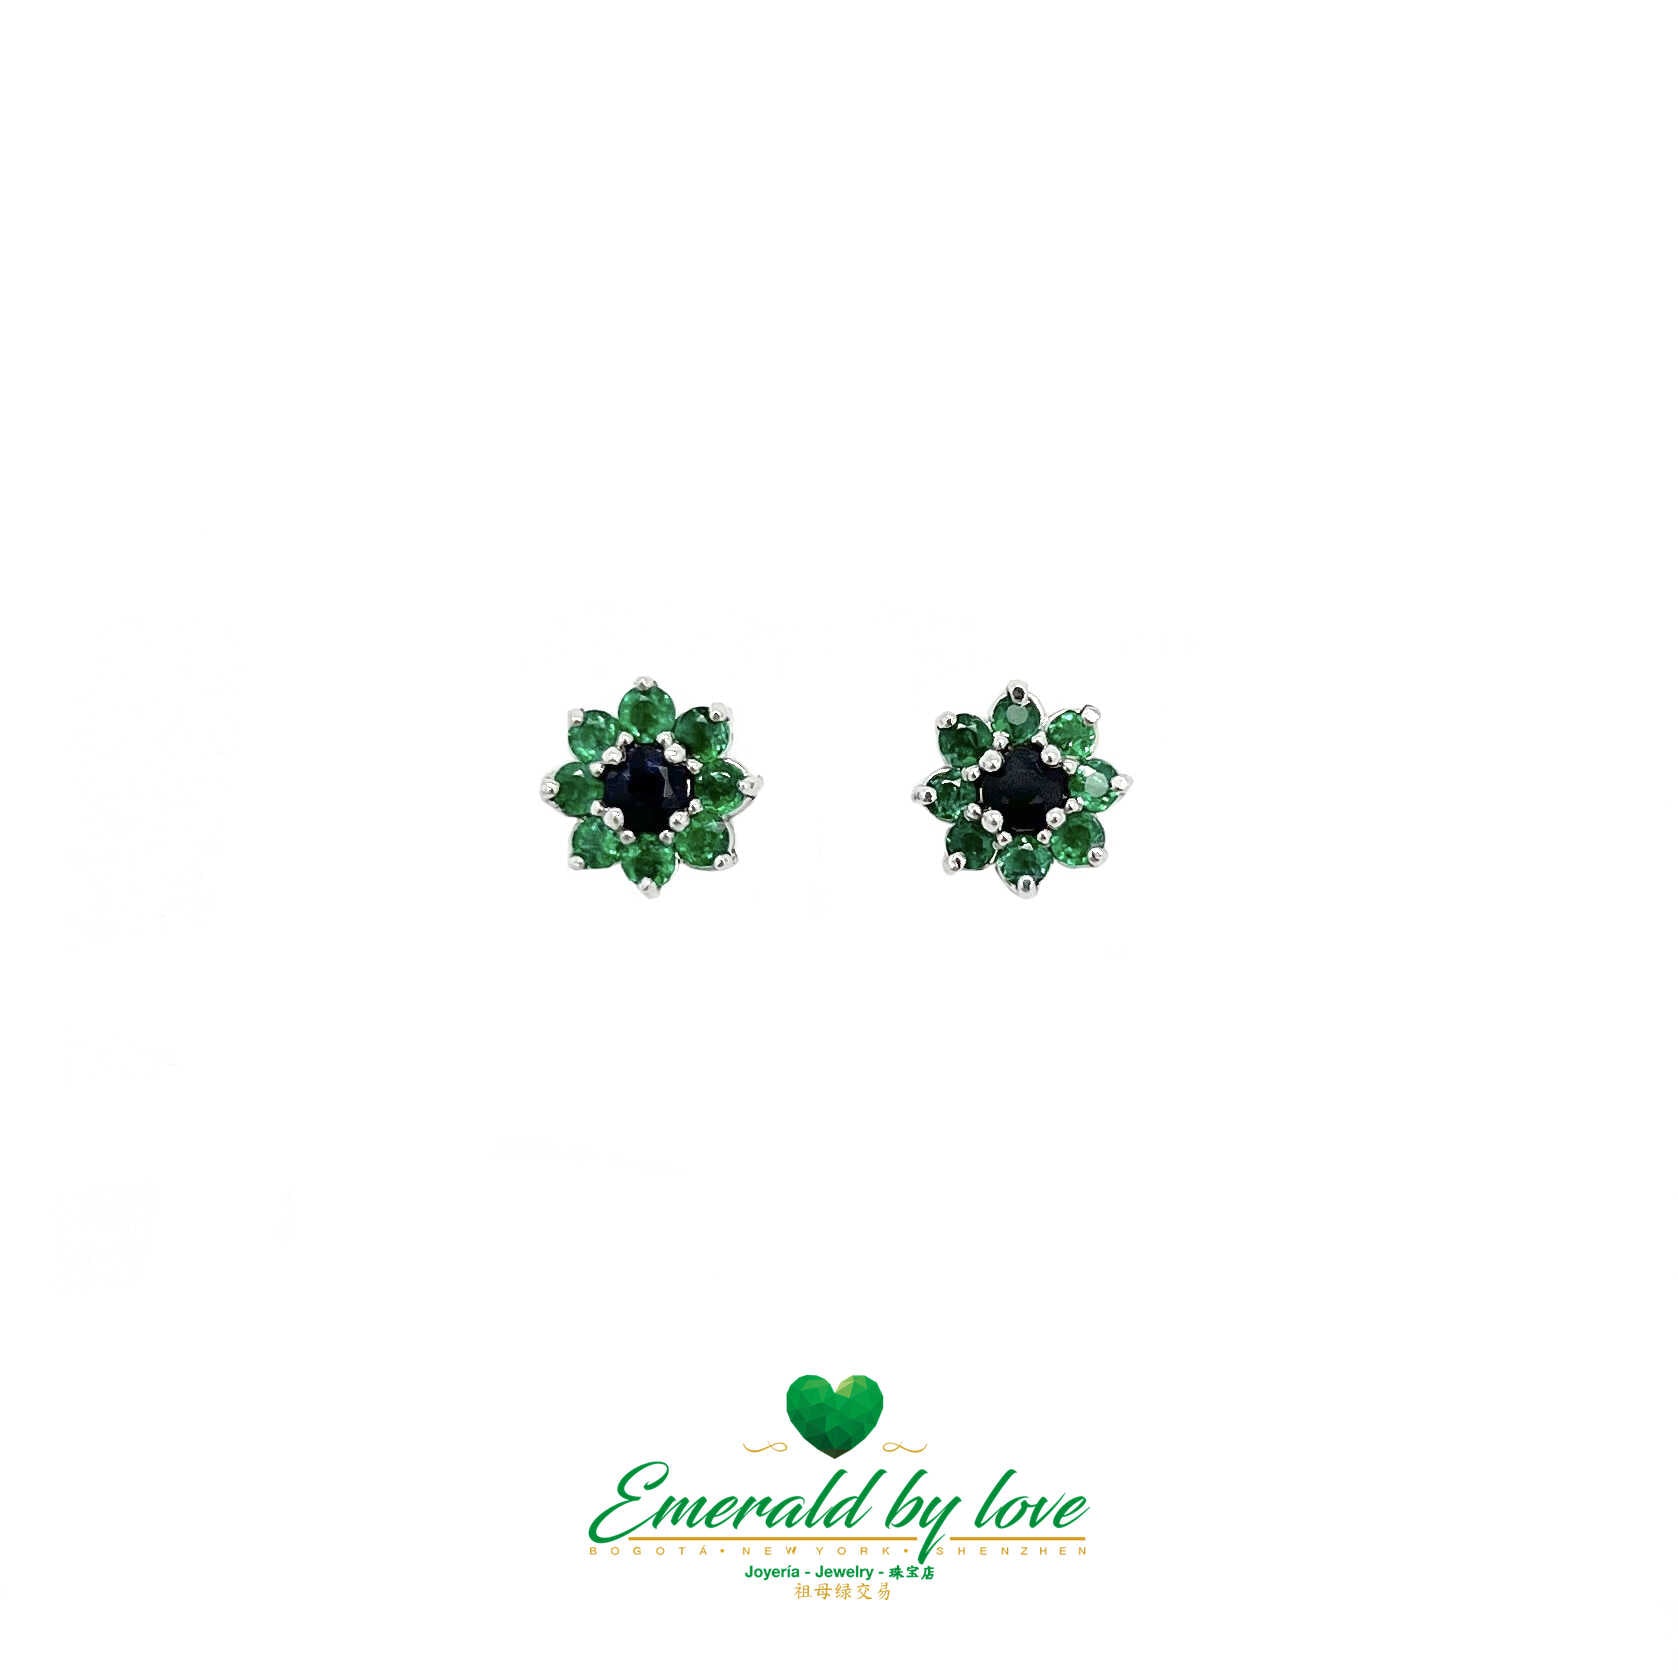 Whimsical Blooms - 18k White Gold Floral Earrings with Sapphires (0.33 TCW) and Round Emeralds (0.43 TCW)